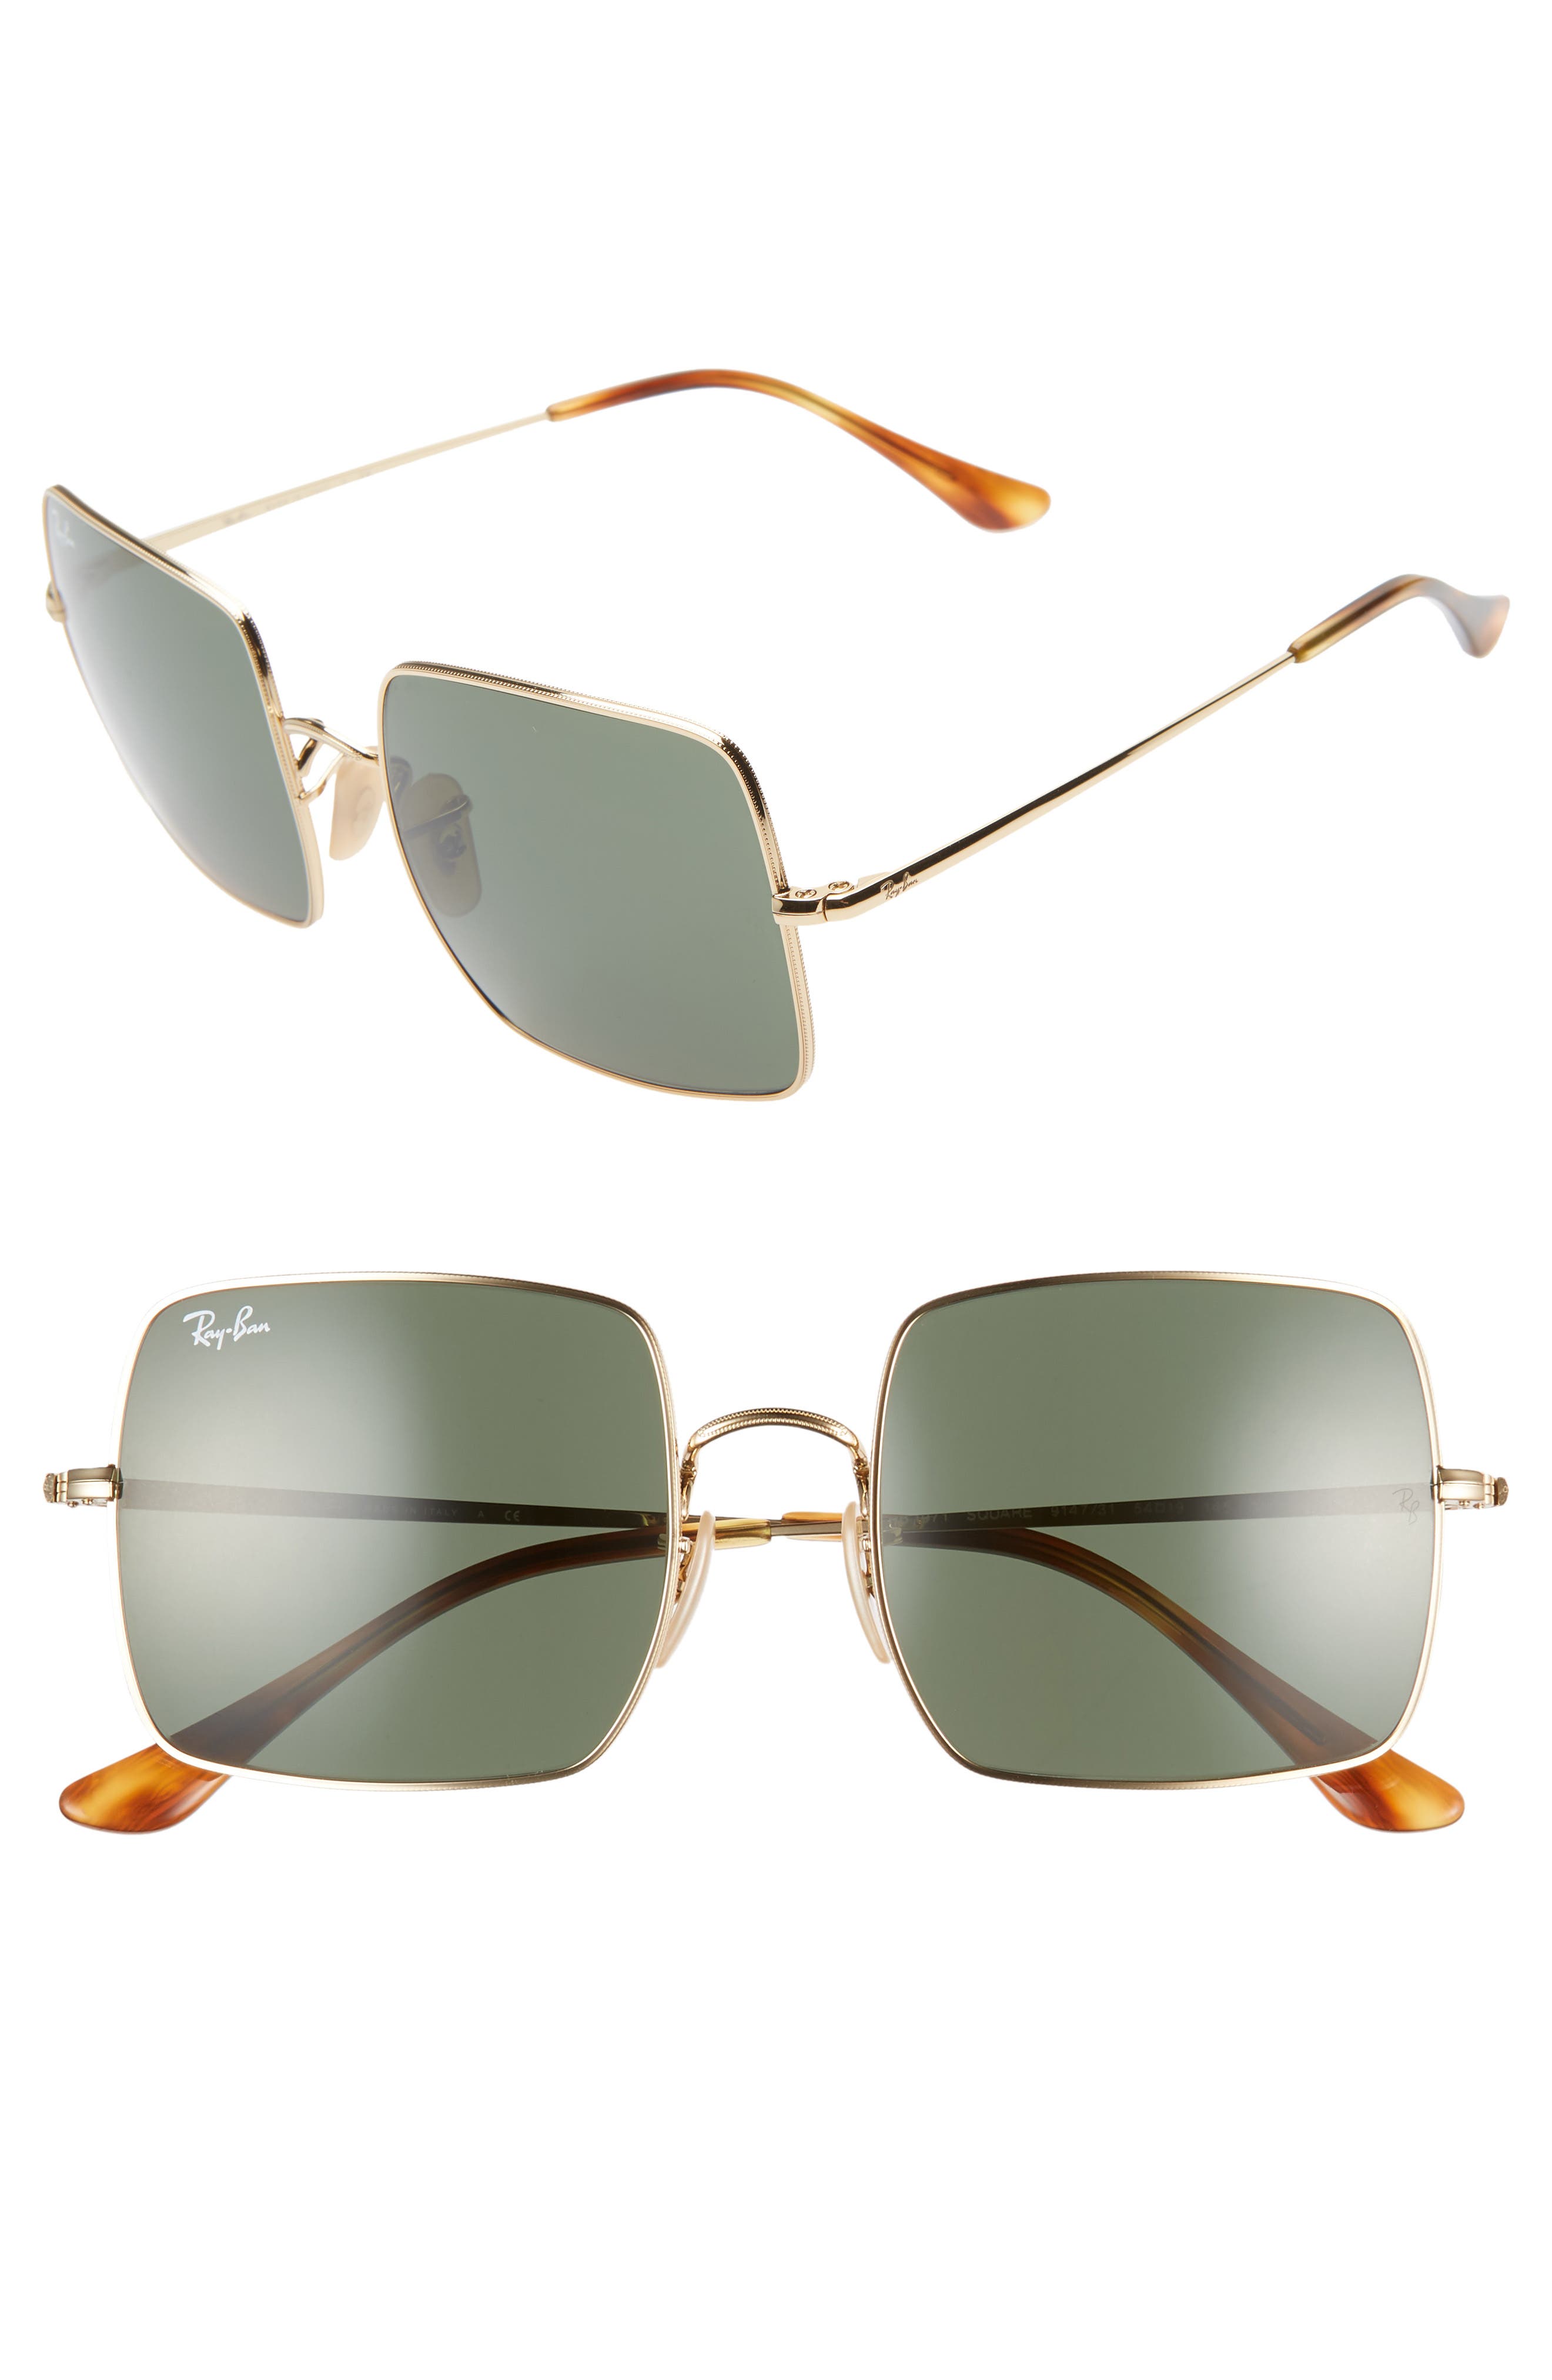 nordstrom ray ban